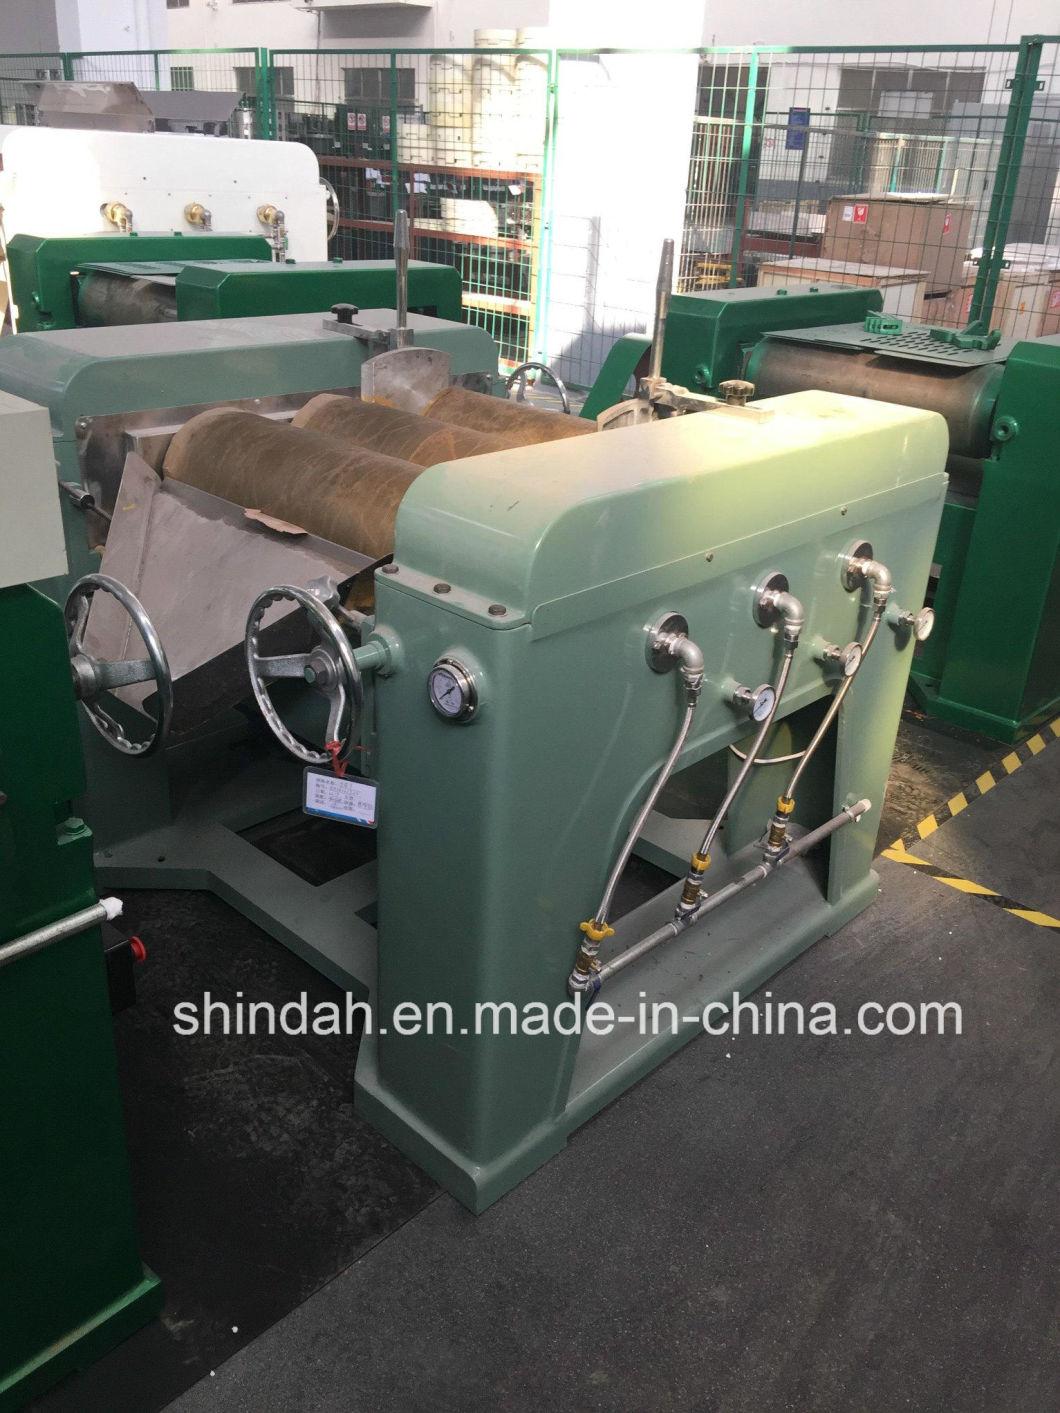 Triple Roller Mill with Super Hard Alloy Roller for Pigment, Paint, Ink